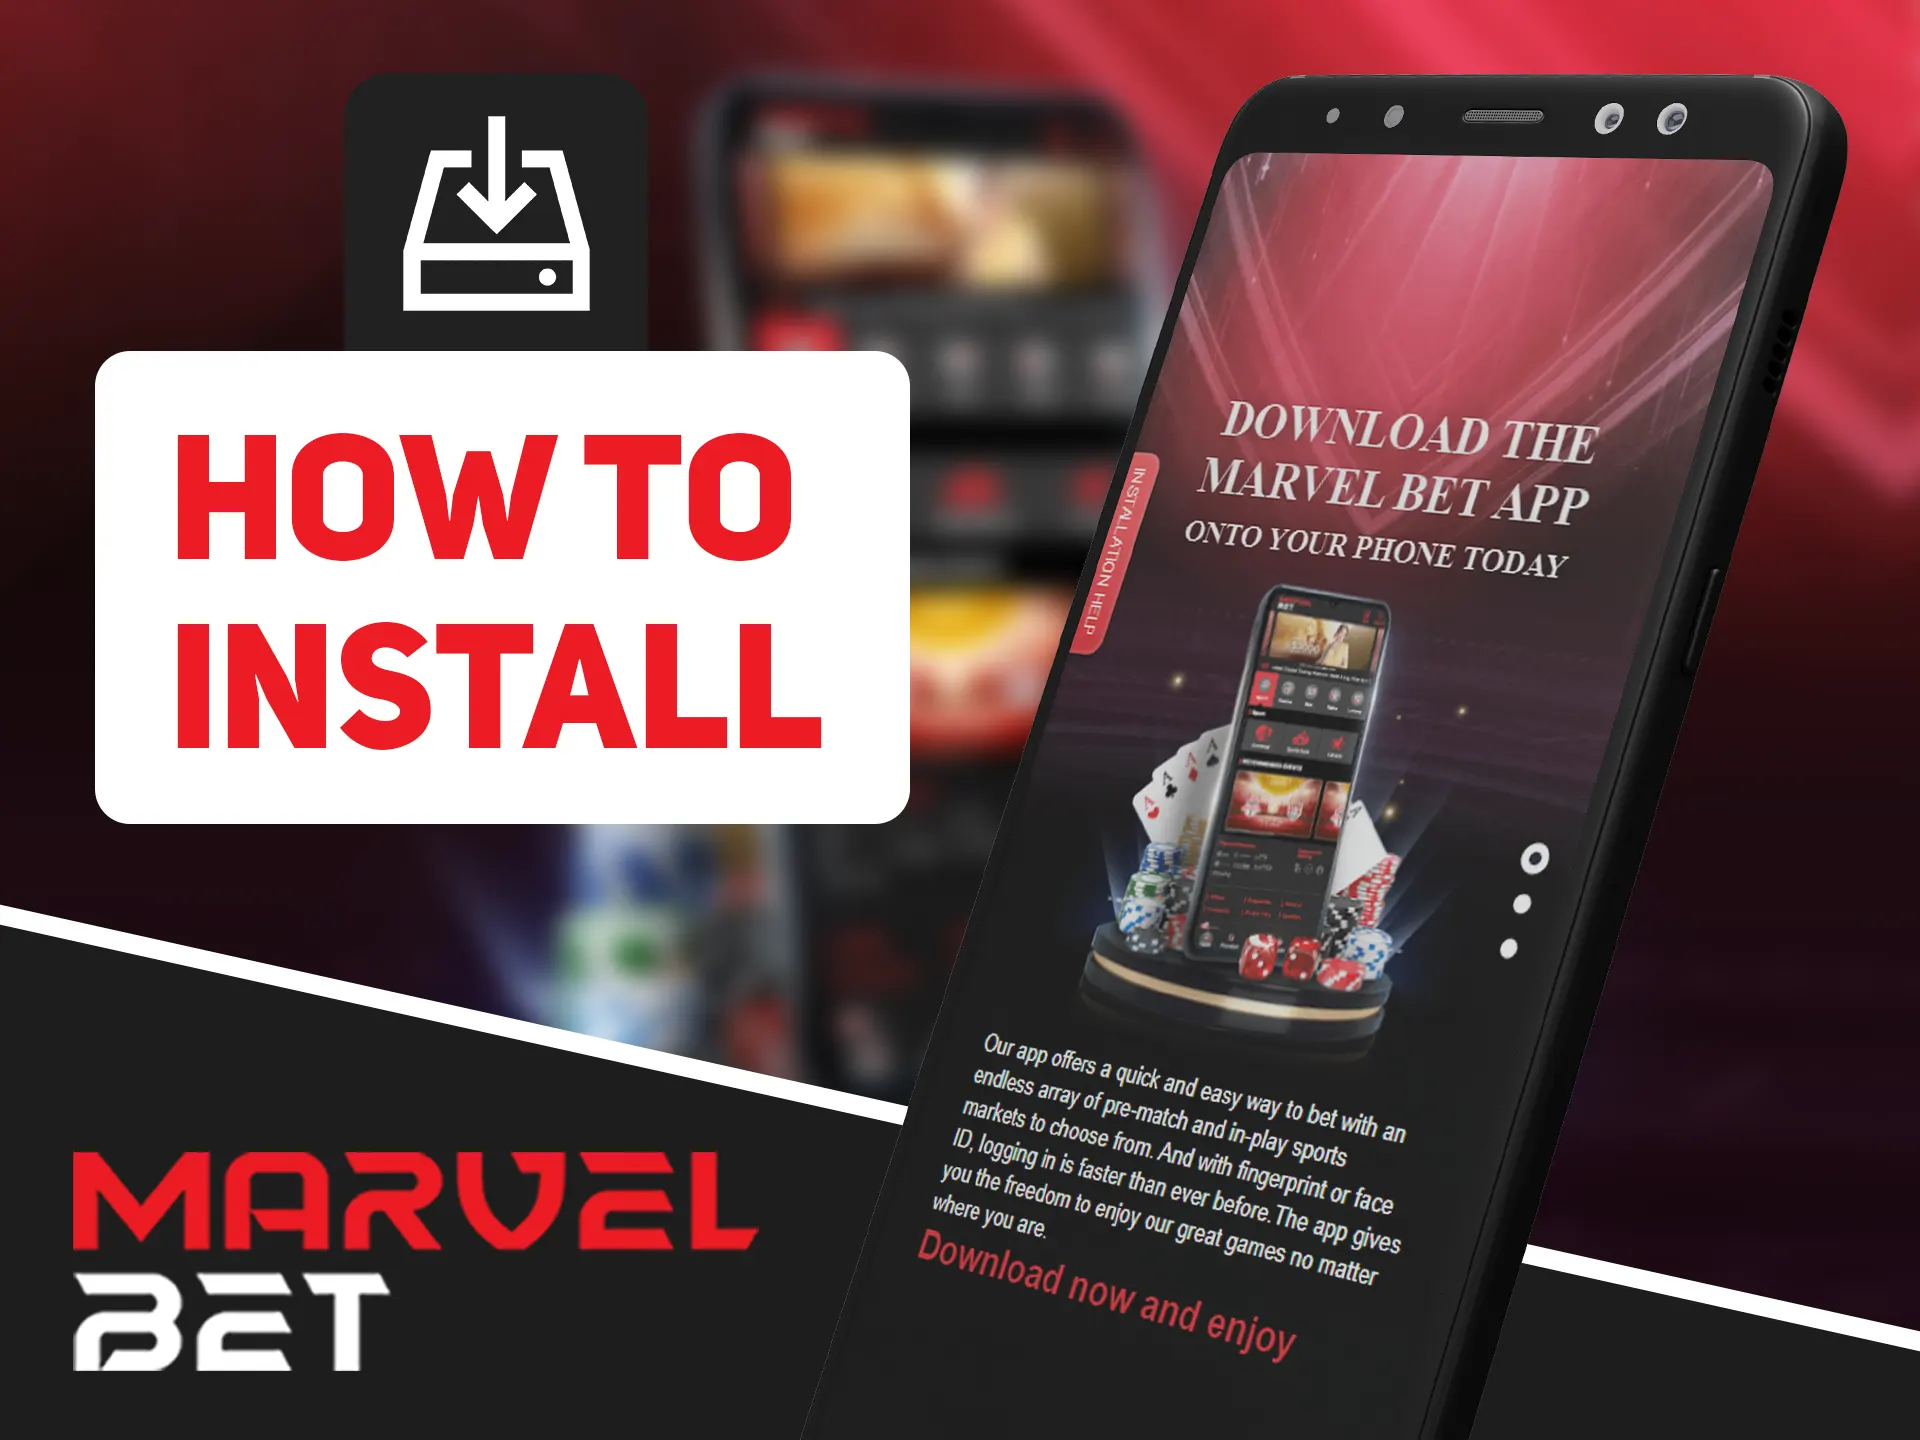 Marvelbet app can be installed on any mobile device.